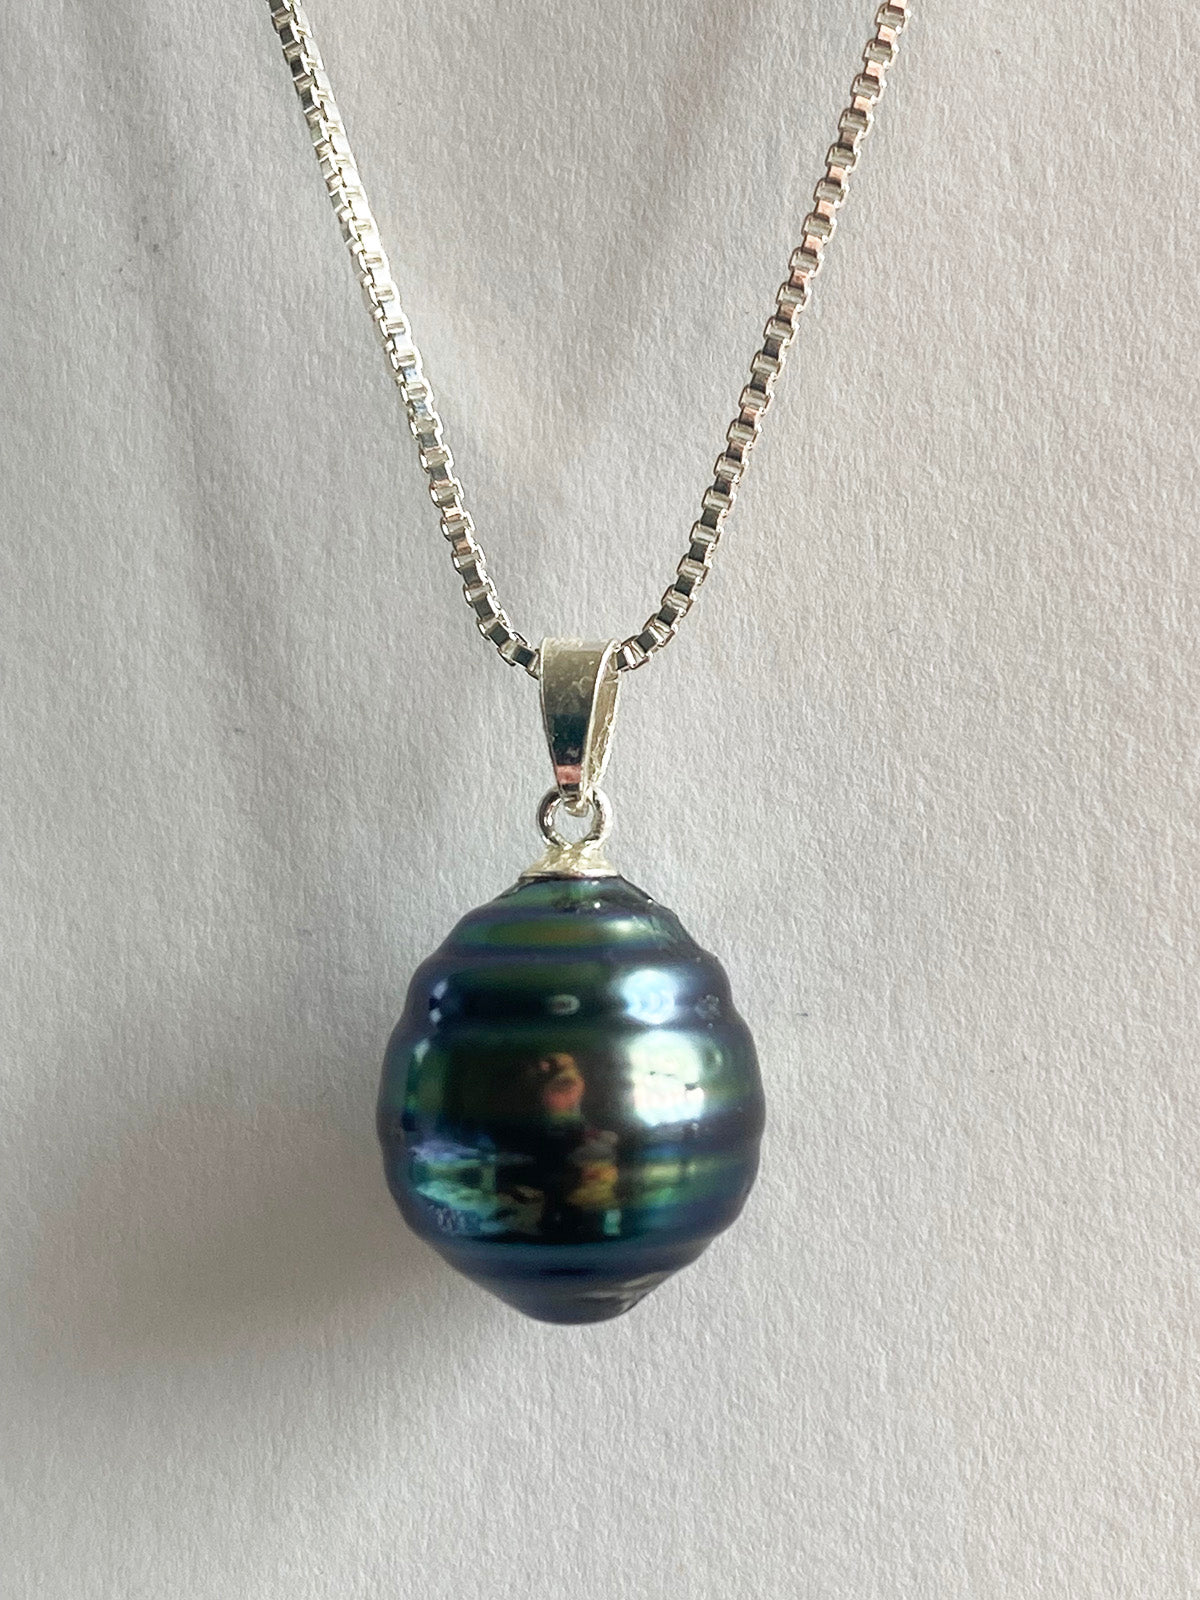 11-13mm Green and Blue Tahitian Circle Pearl Pendant by Linda Queally